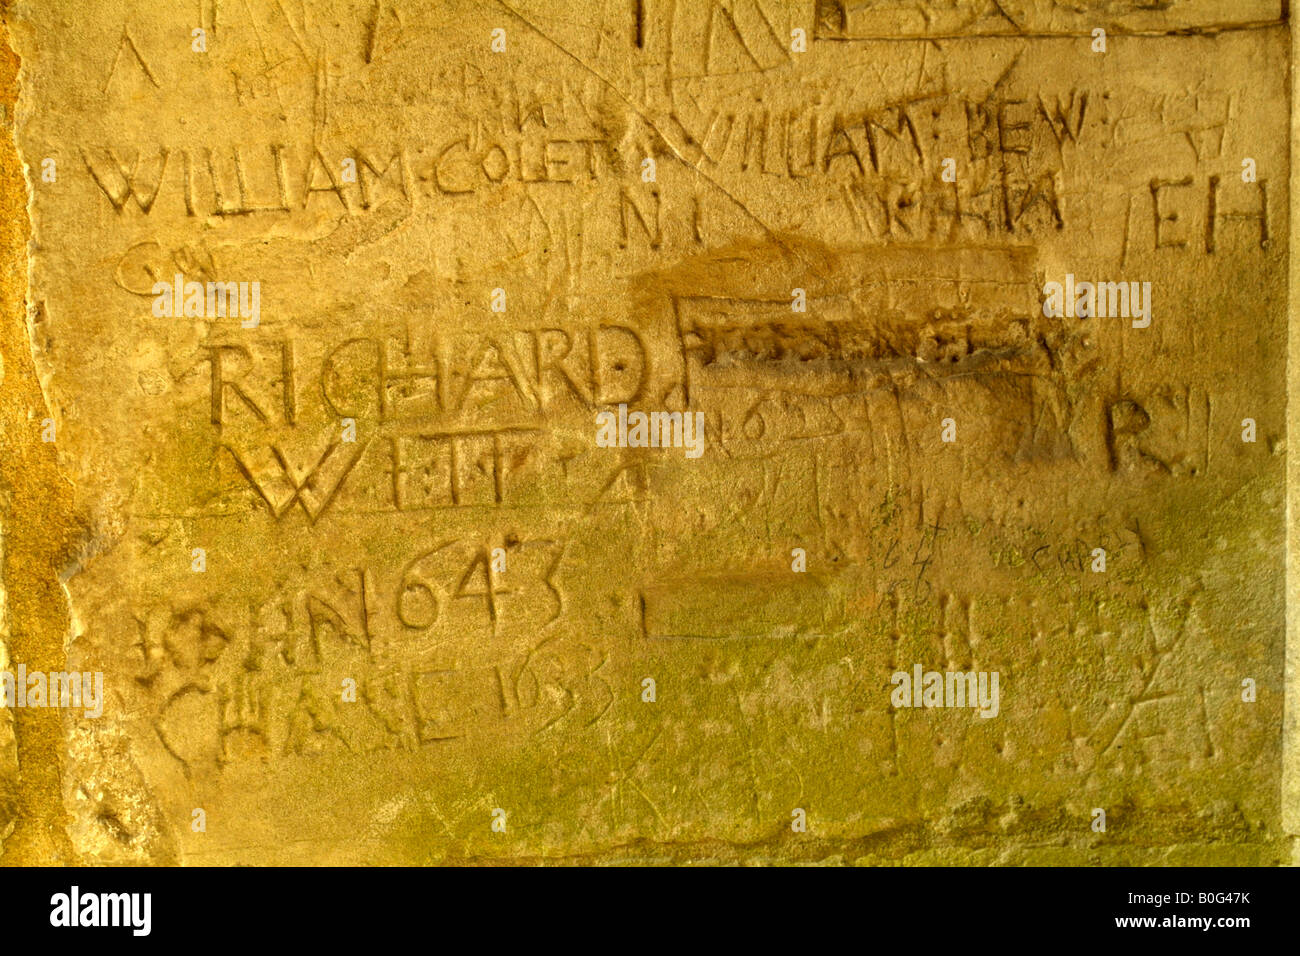 Winchester College Hampshire England UK Ex Pupils names carved in stone during the 1600s Stock Photo